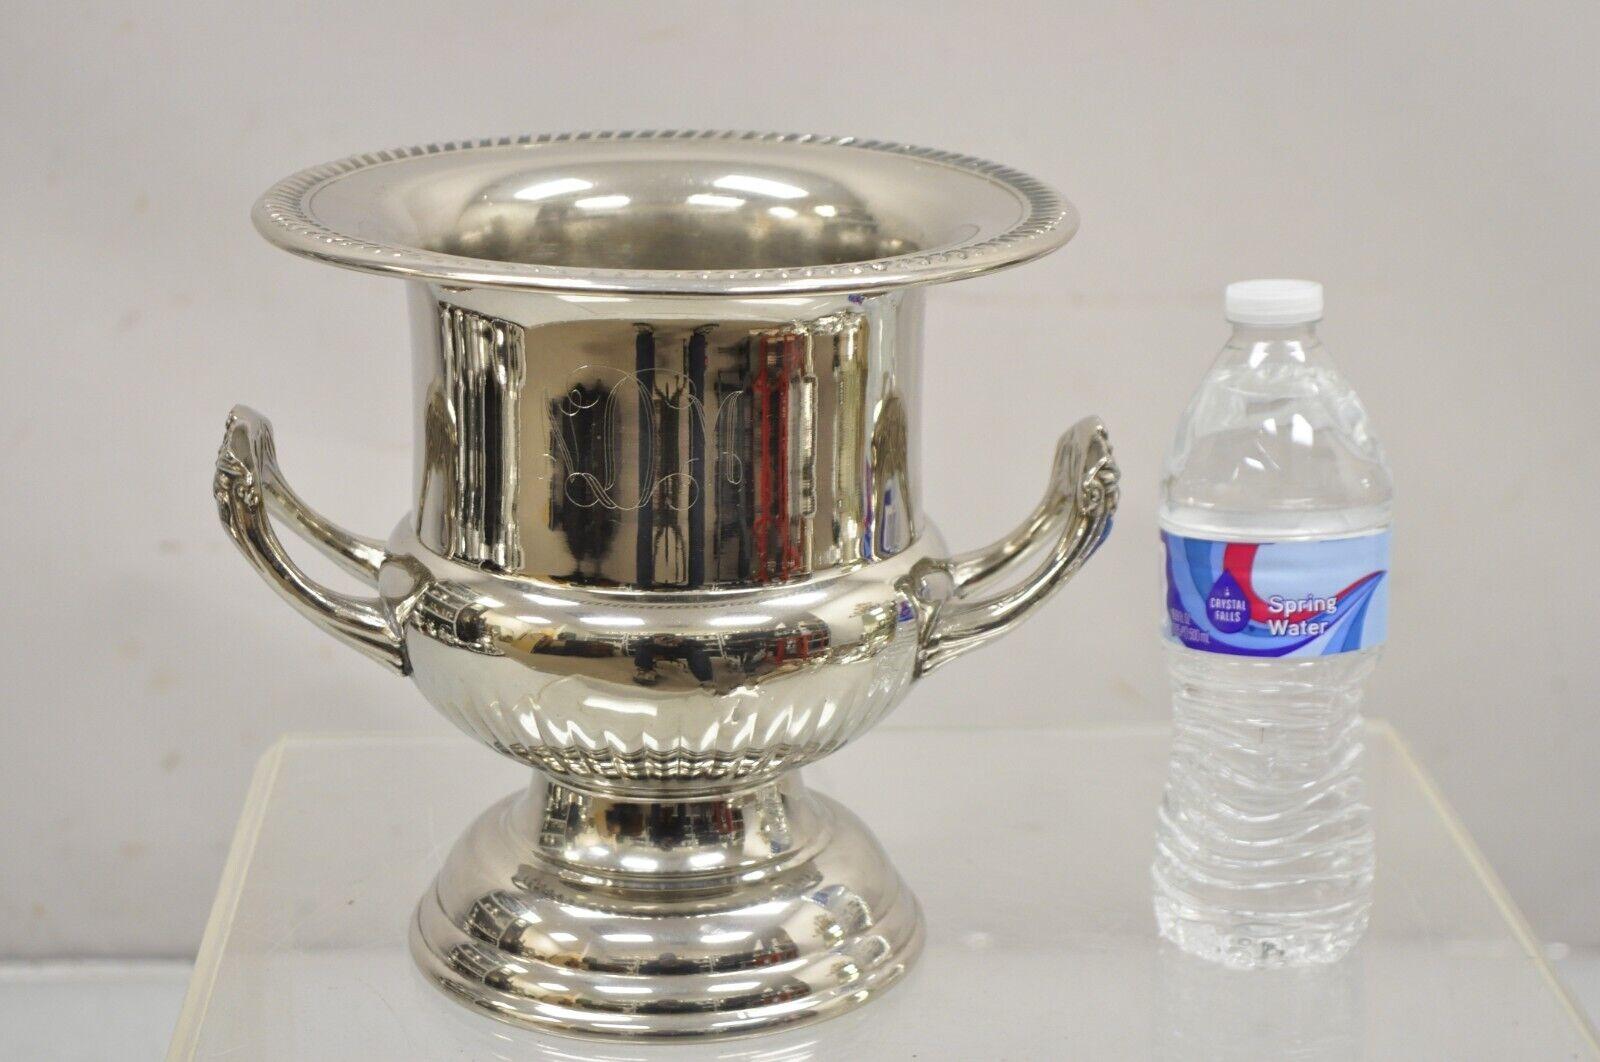 Vintage Regency Style Silver Plated Trophy Cup Champagne Chiller Ice Bucket. Item features 